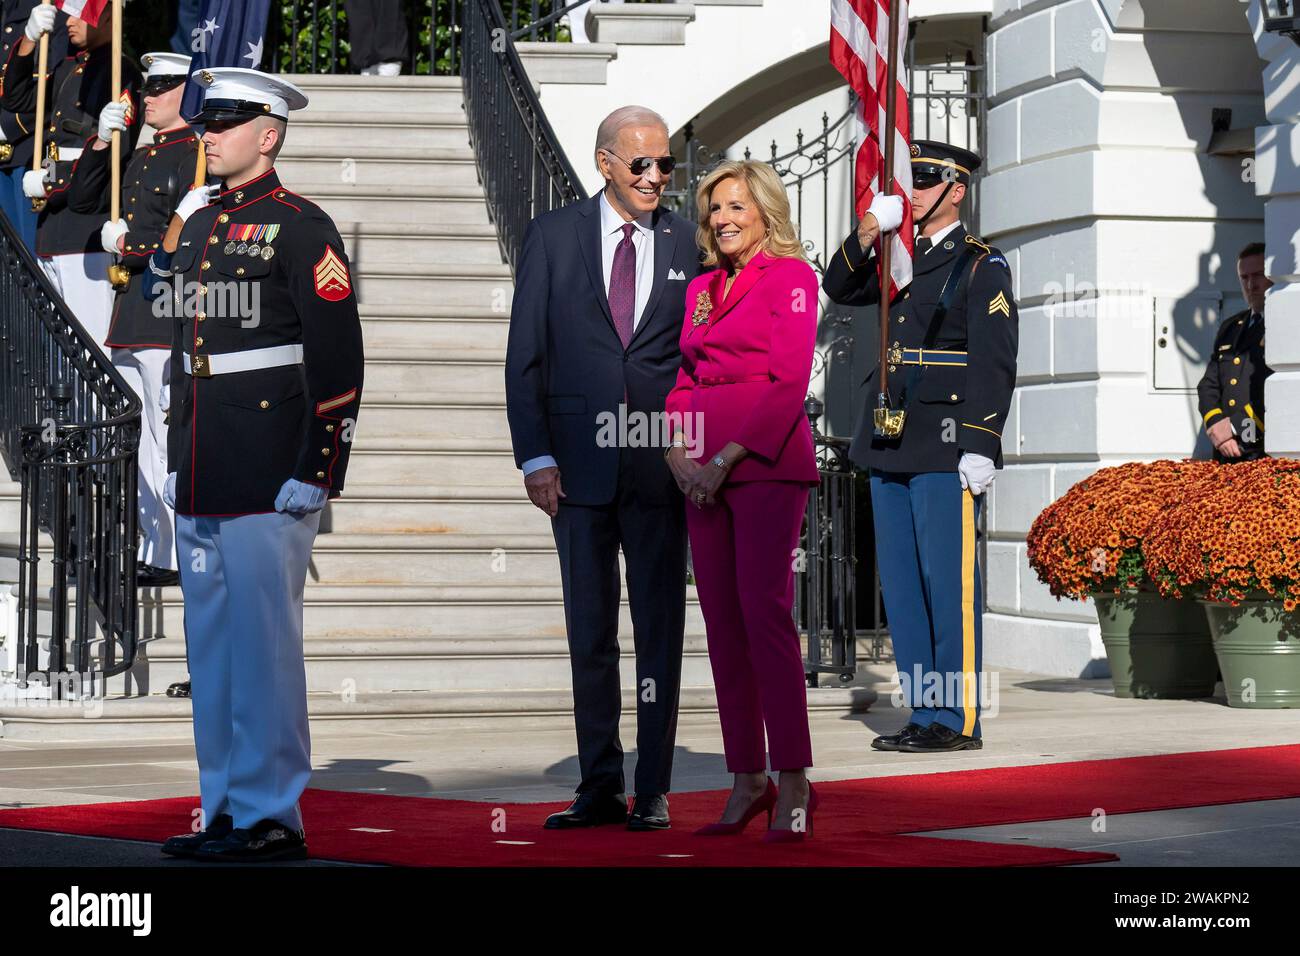 Washington, United States of America. 25 October, 2023. U.S President Joe Biden and First Lady Jill Biden wait for the motorcade carrying Australian Prime Minister Anthony Albanese and his partner Jodie Haydon during the State Arrival Ceremony on the South Lawn of the White House, October 25, 2023 in Washington, D.C.  Credit: Oliver Contreras/White House Photo/Alamy Live News Stock Photo